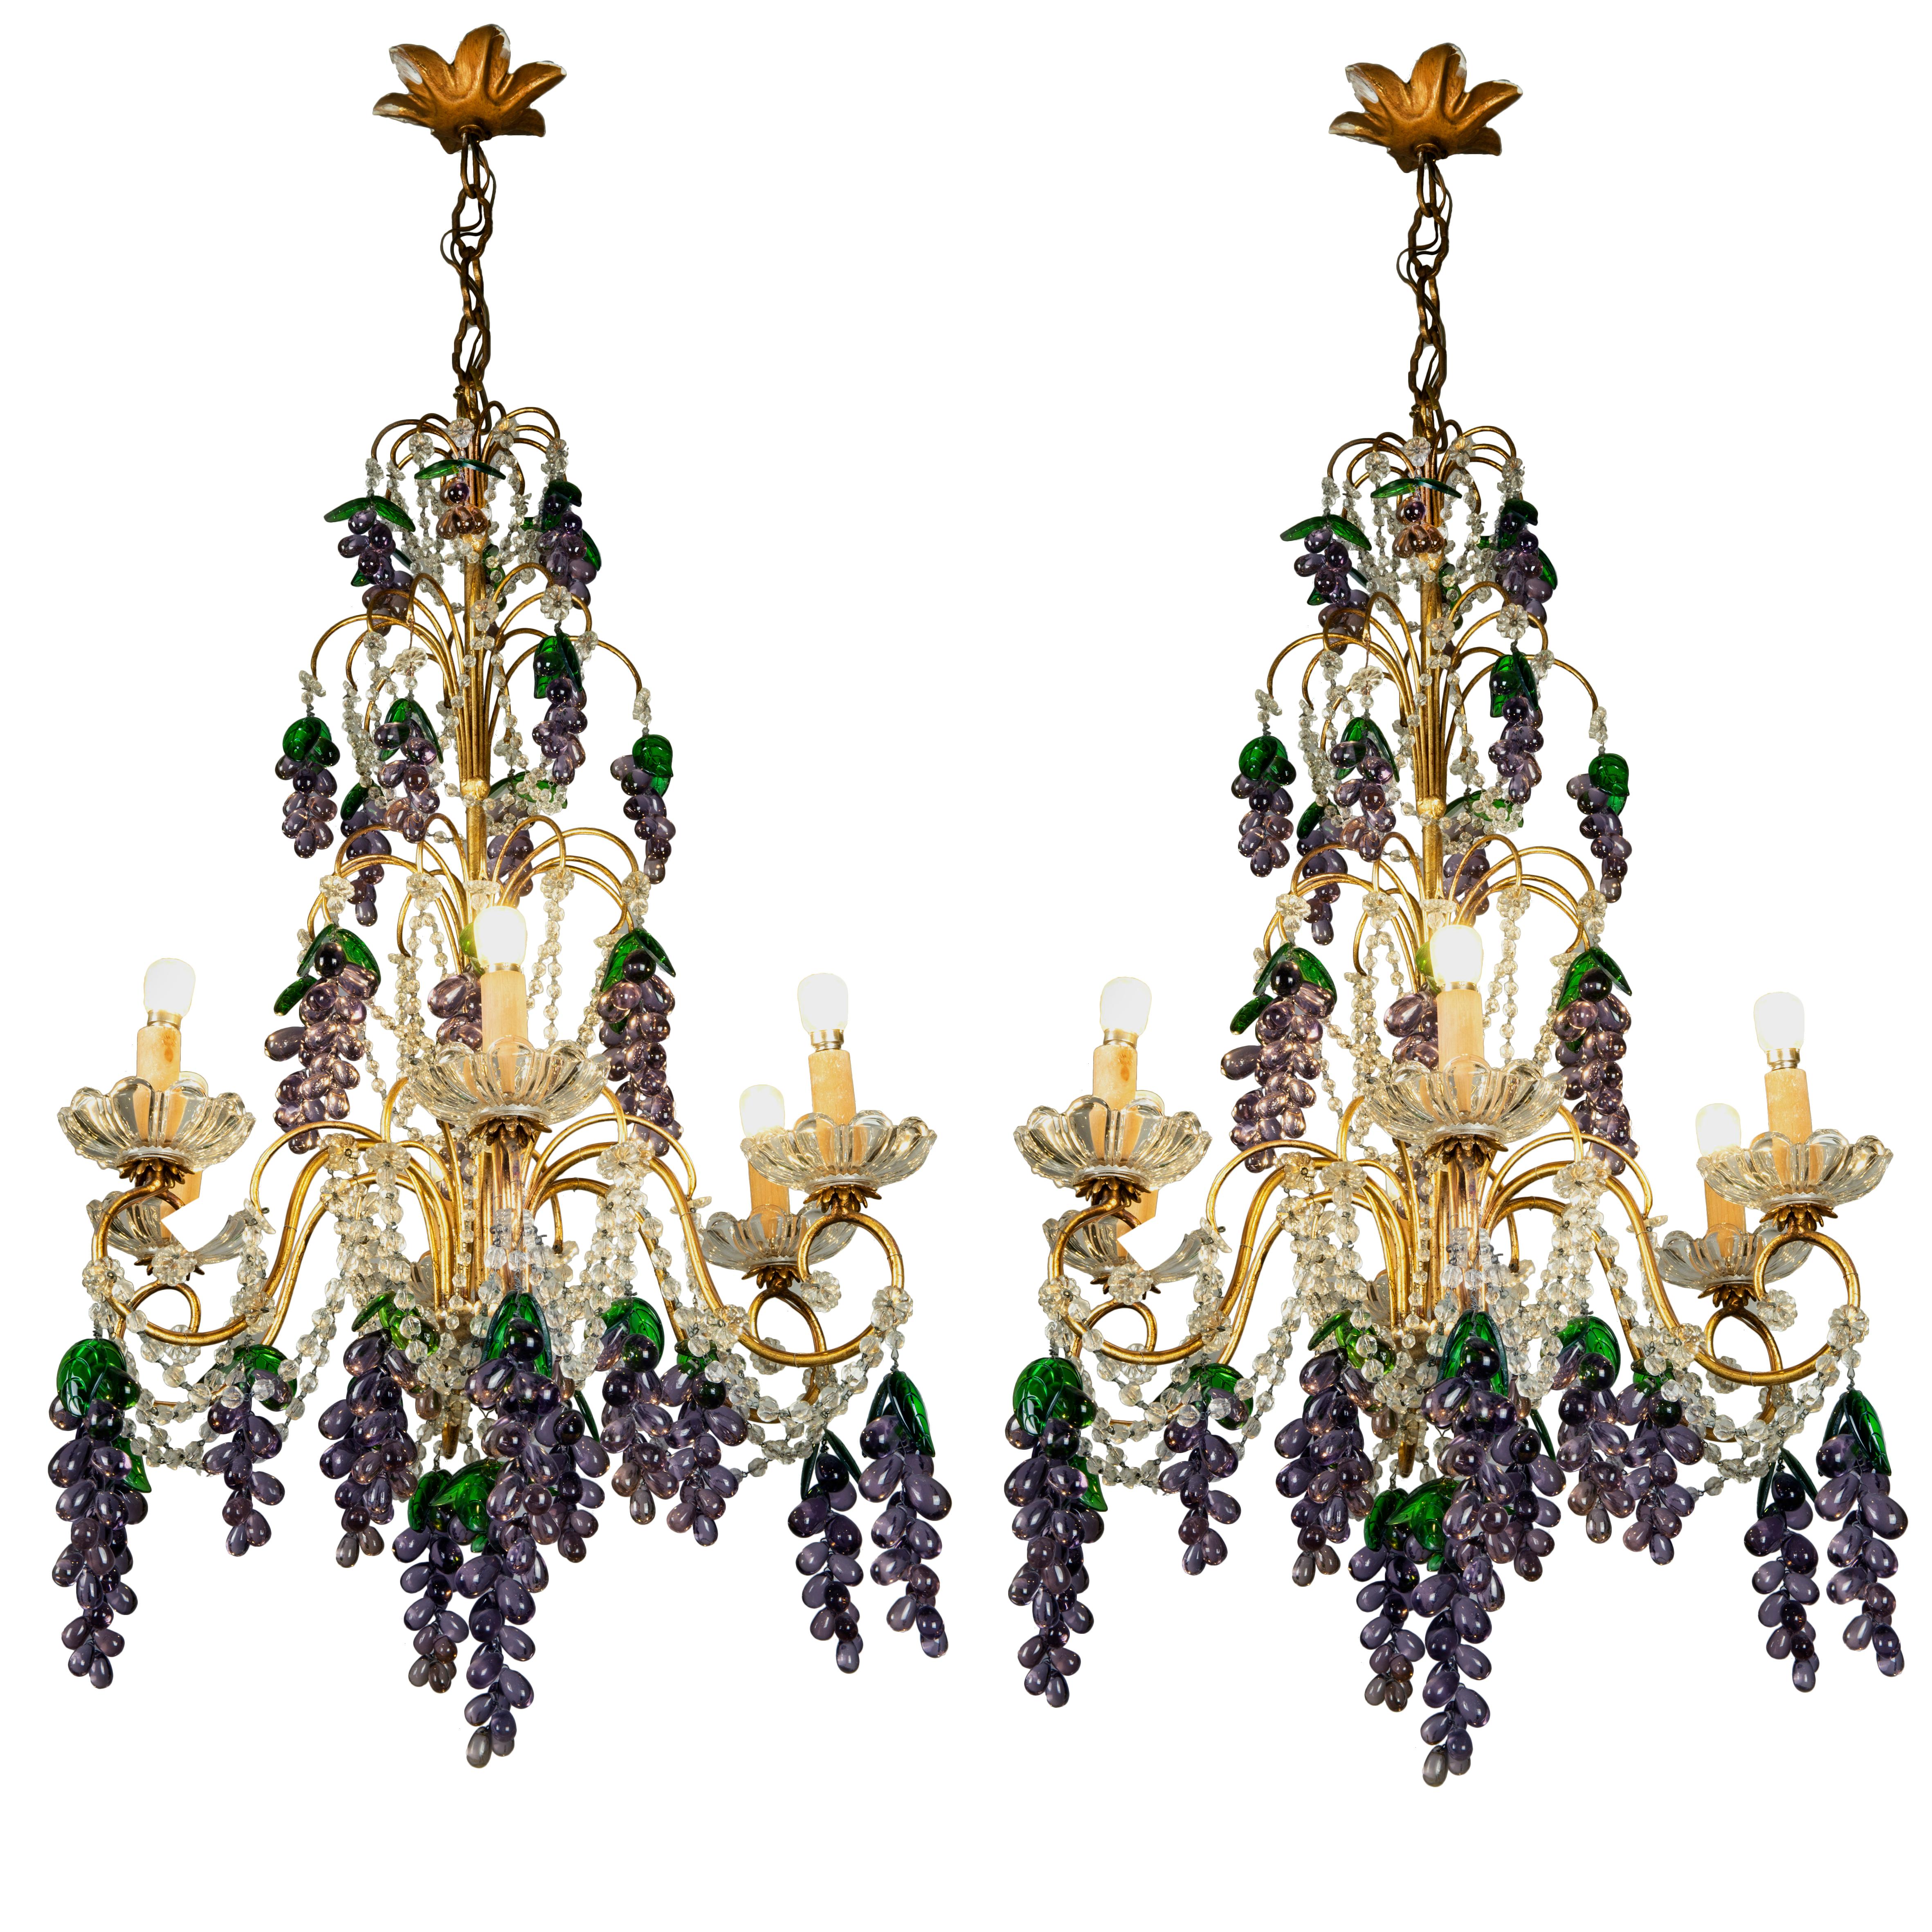 Pair of Mid-20th Century Italian Chandeliers with Purple Murano Glass Grapes